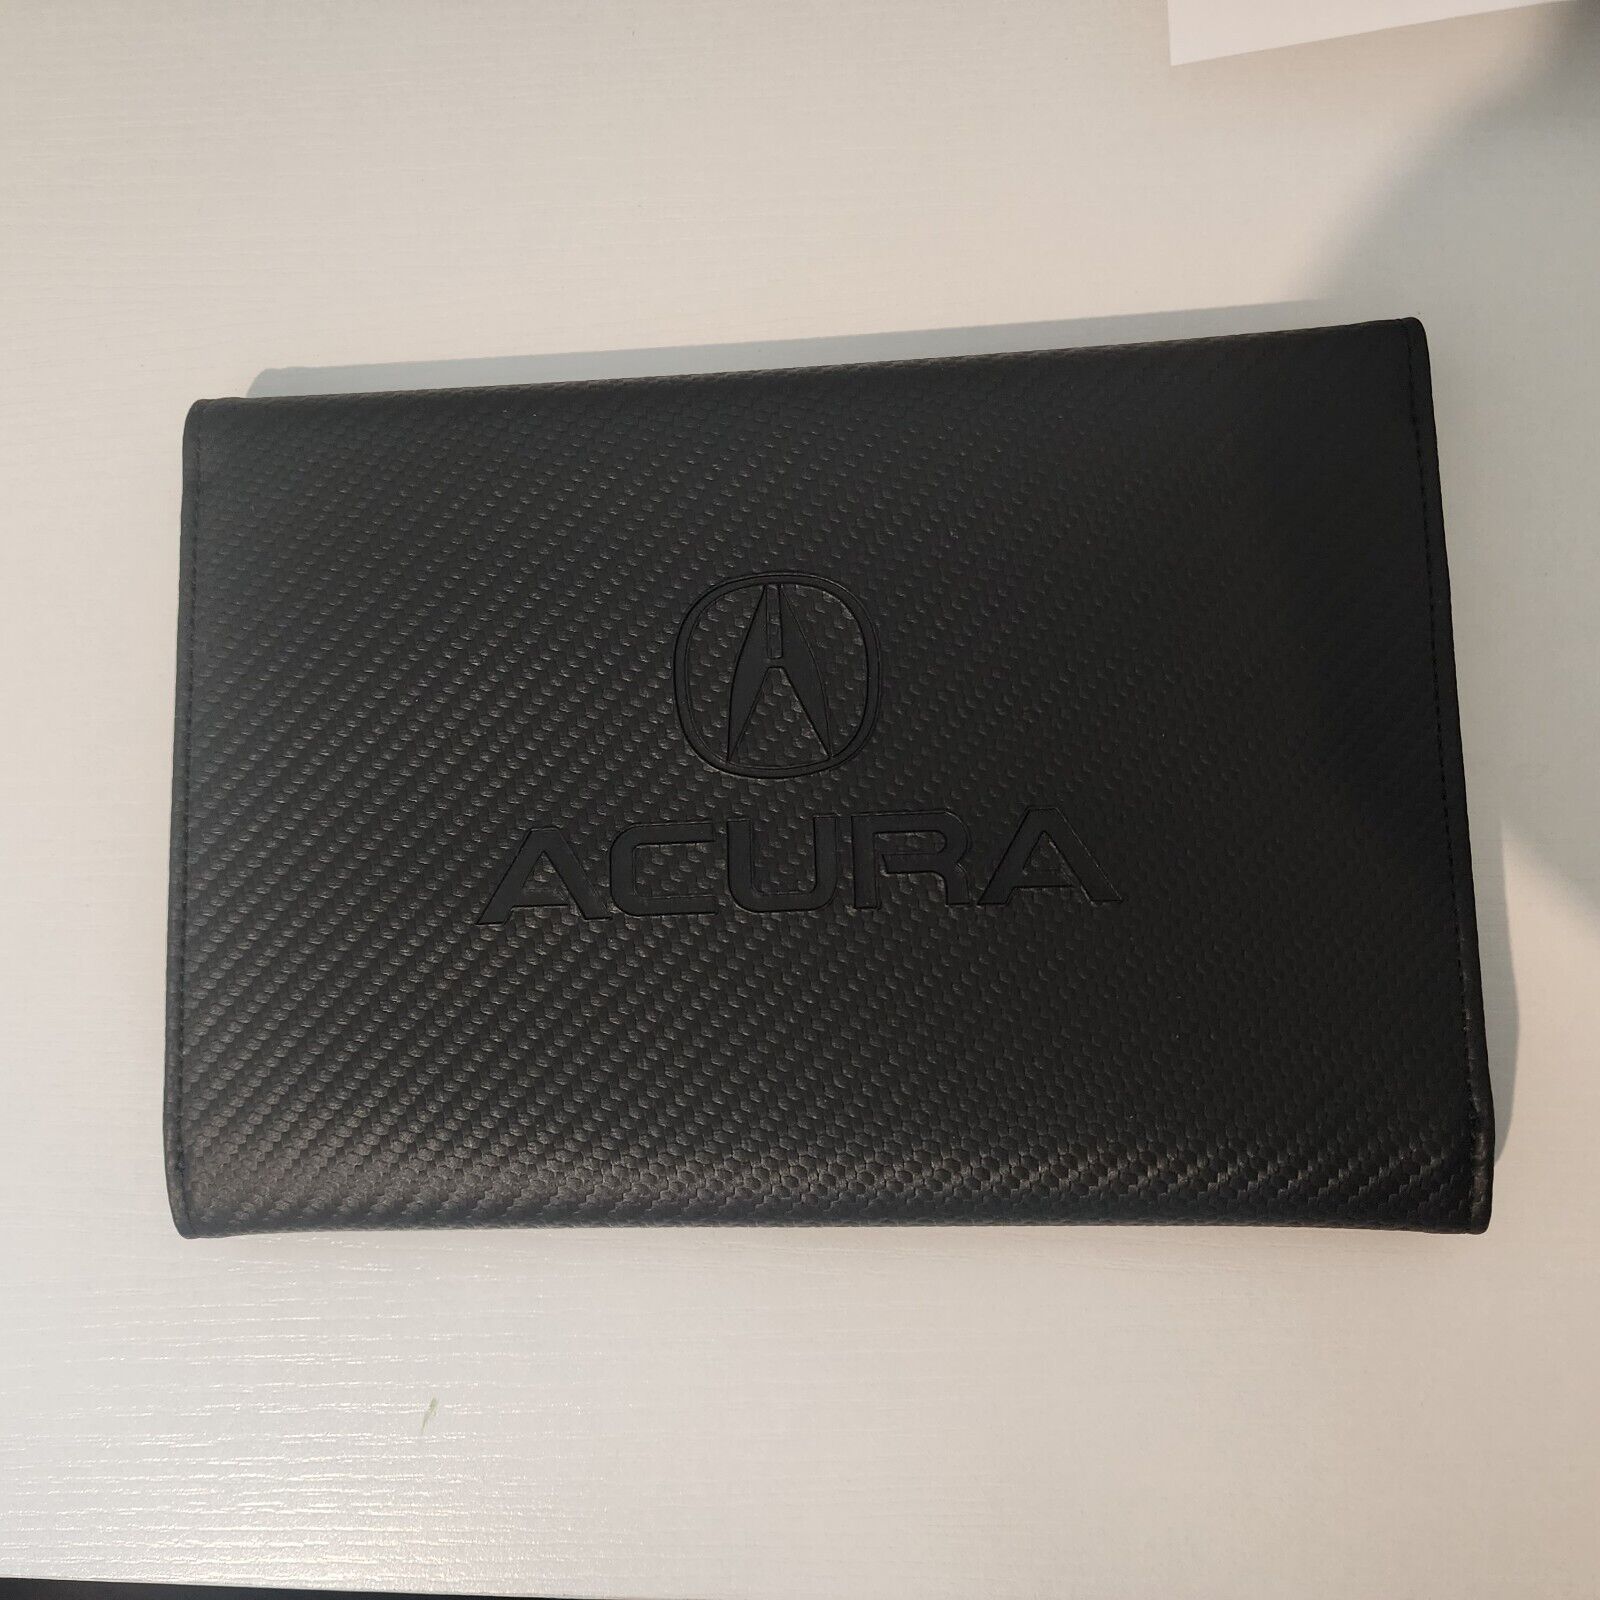 2017 Acura NSX Original Carbon Fiber Case for Owners Manual - Brand New - OEM